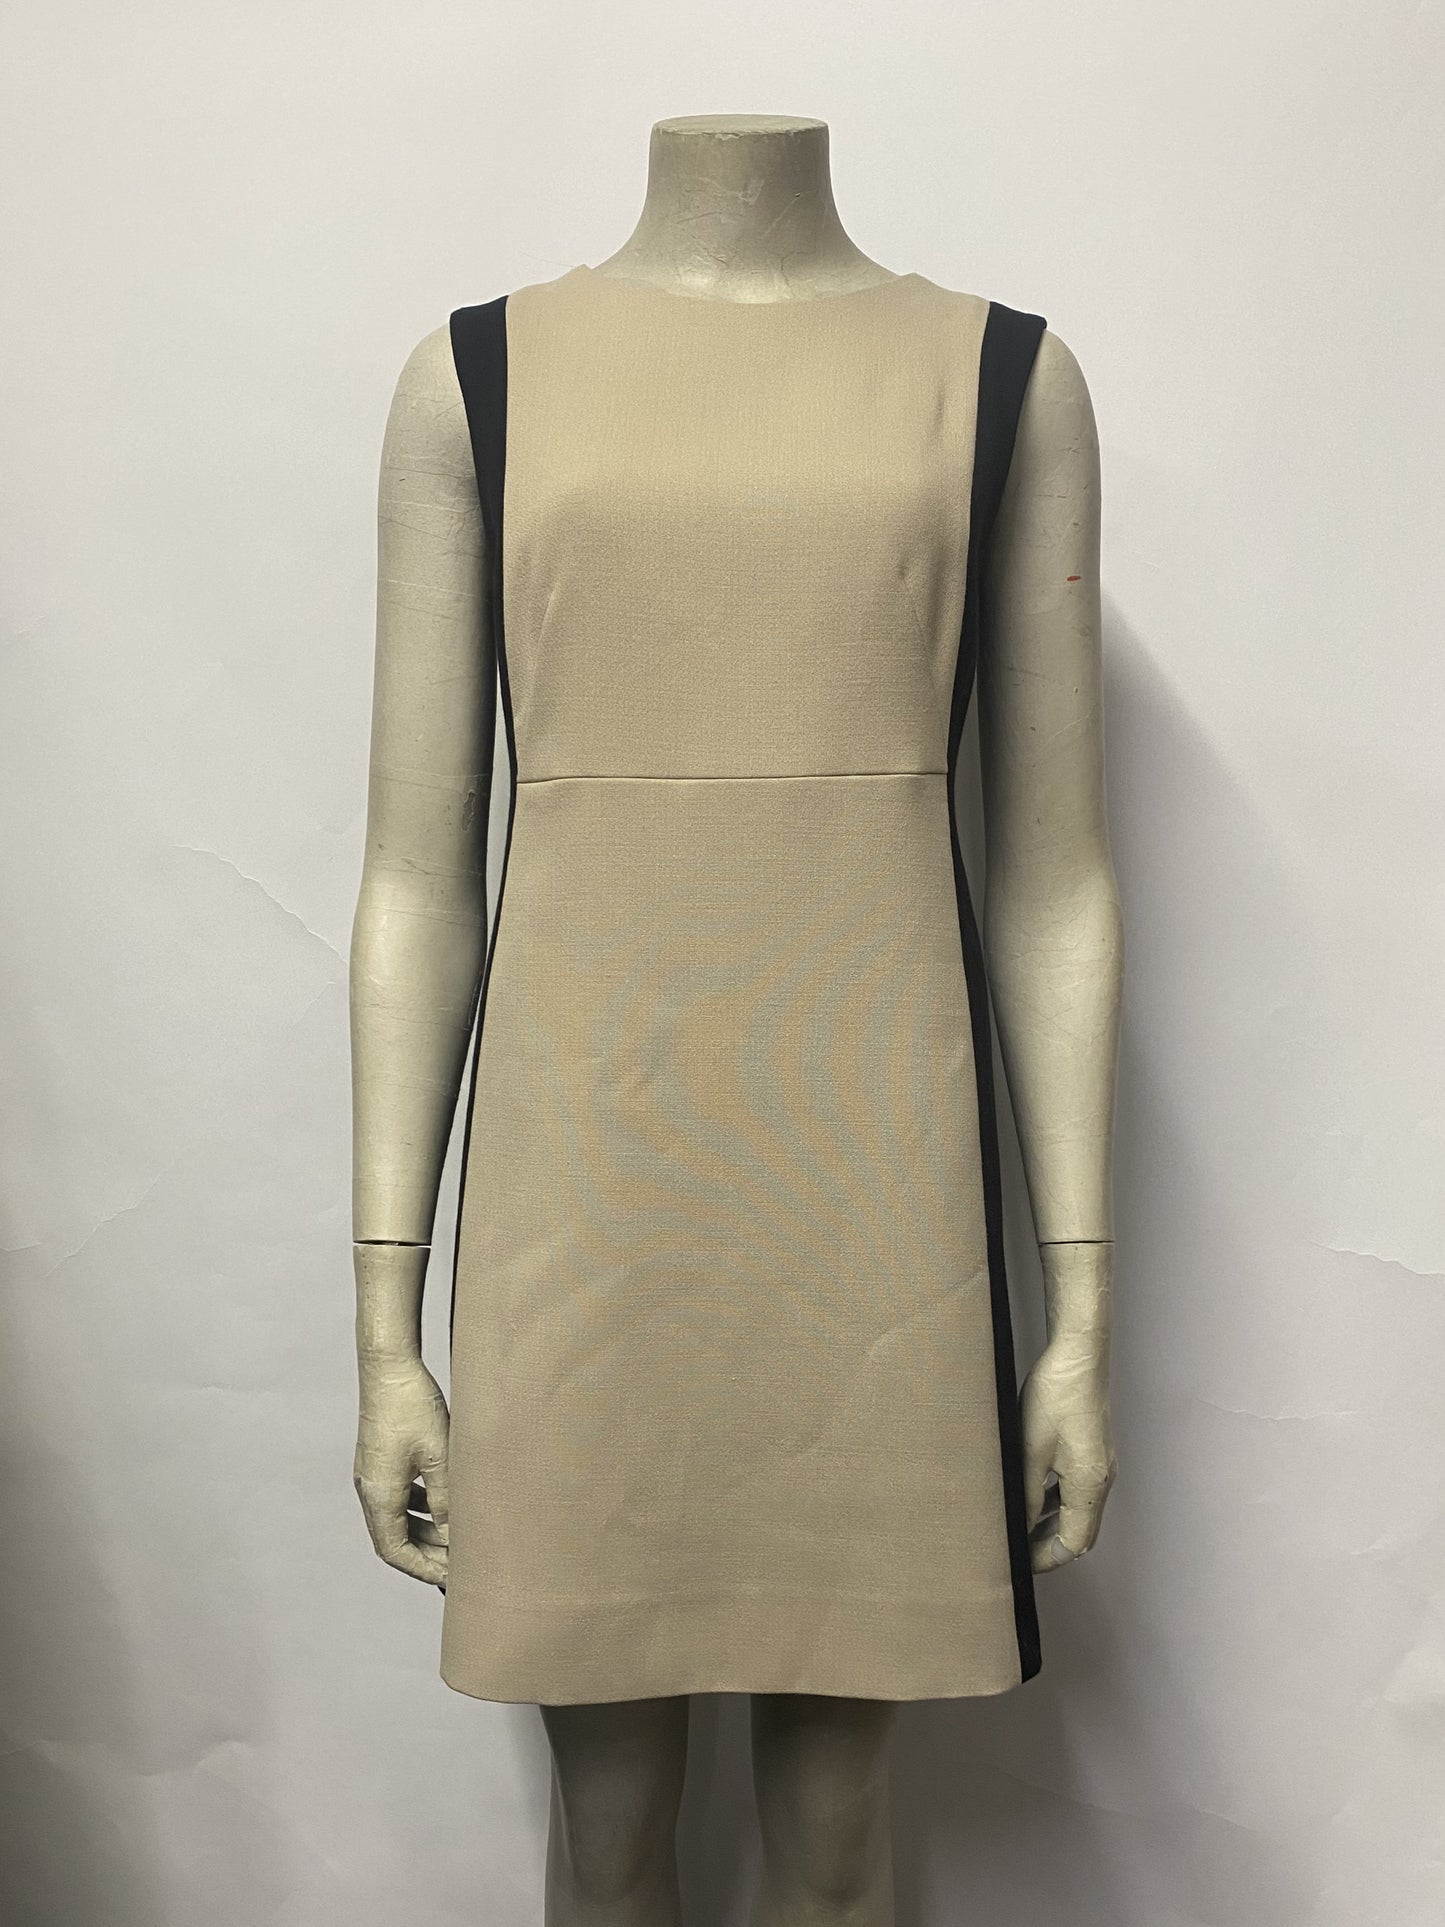 Kate Spade Black and Nude Panel Bodycon Dress Small